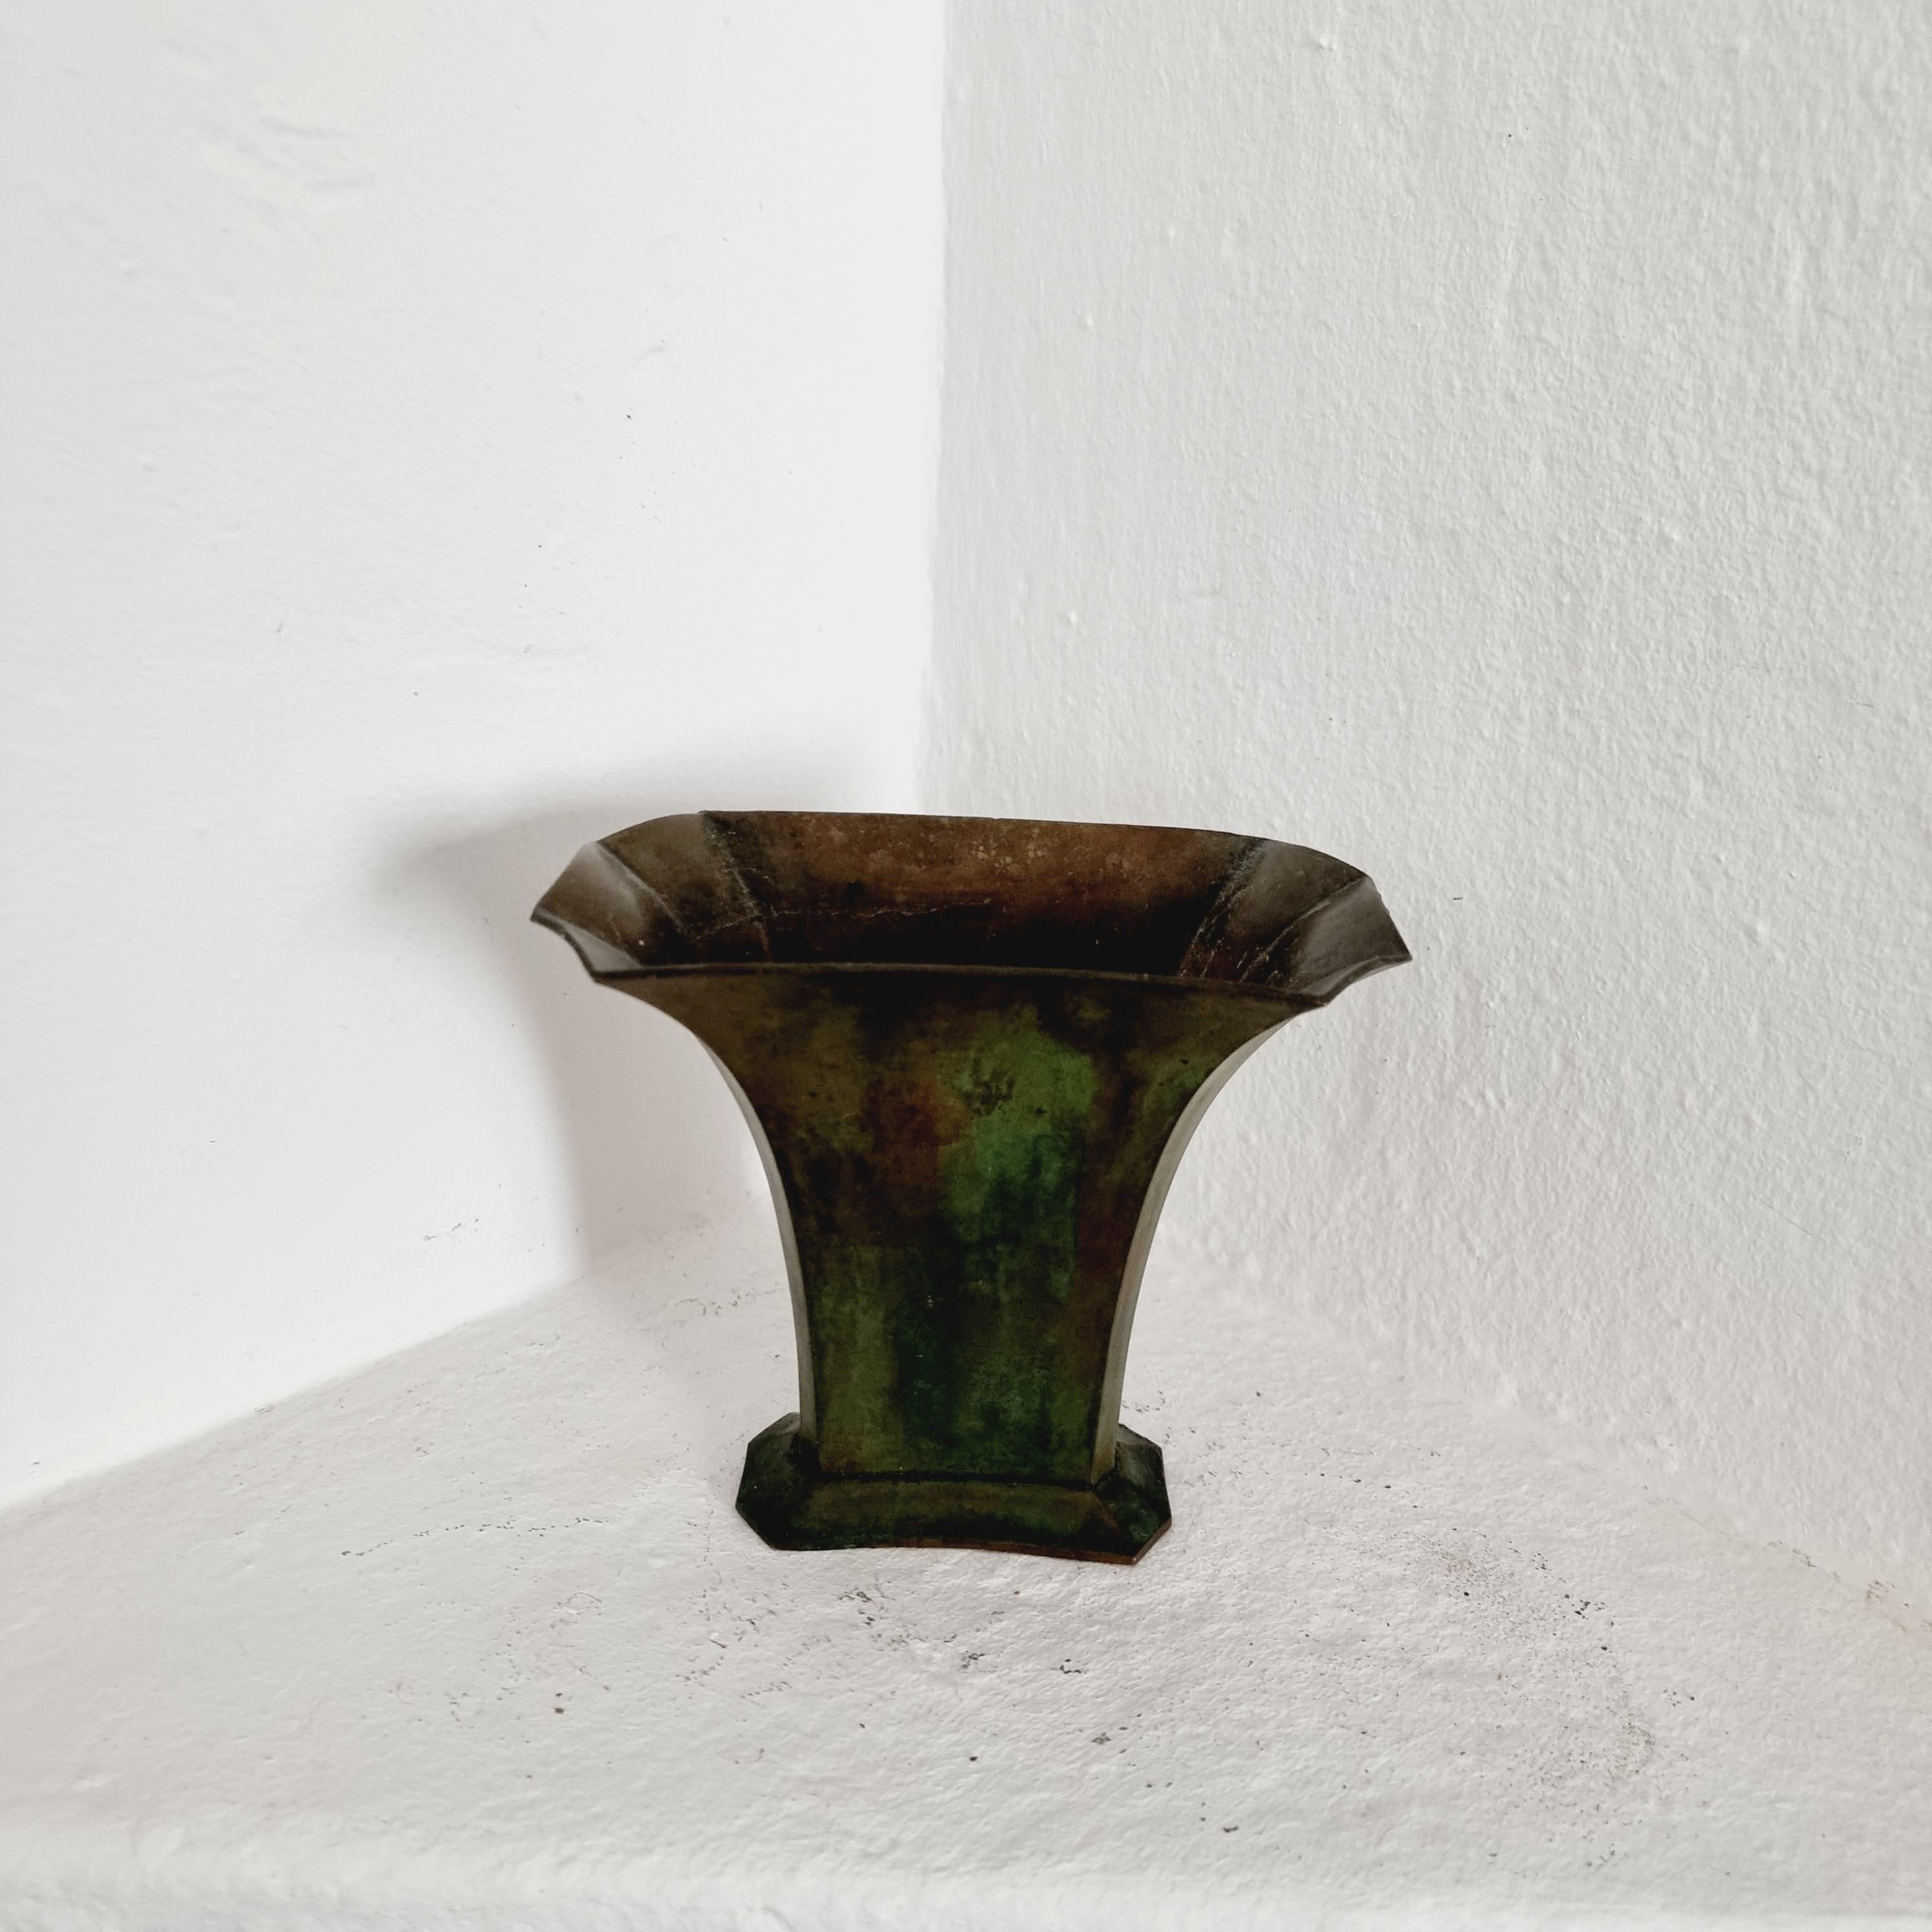 Swedish Grace / Art Deco vase in solid bronze by and markers marked Sune Bäckström. 

In good condition, signs of age and wear.